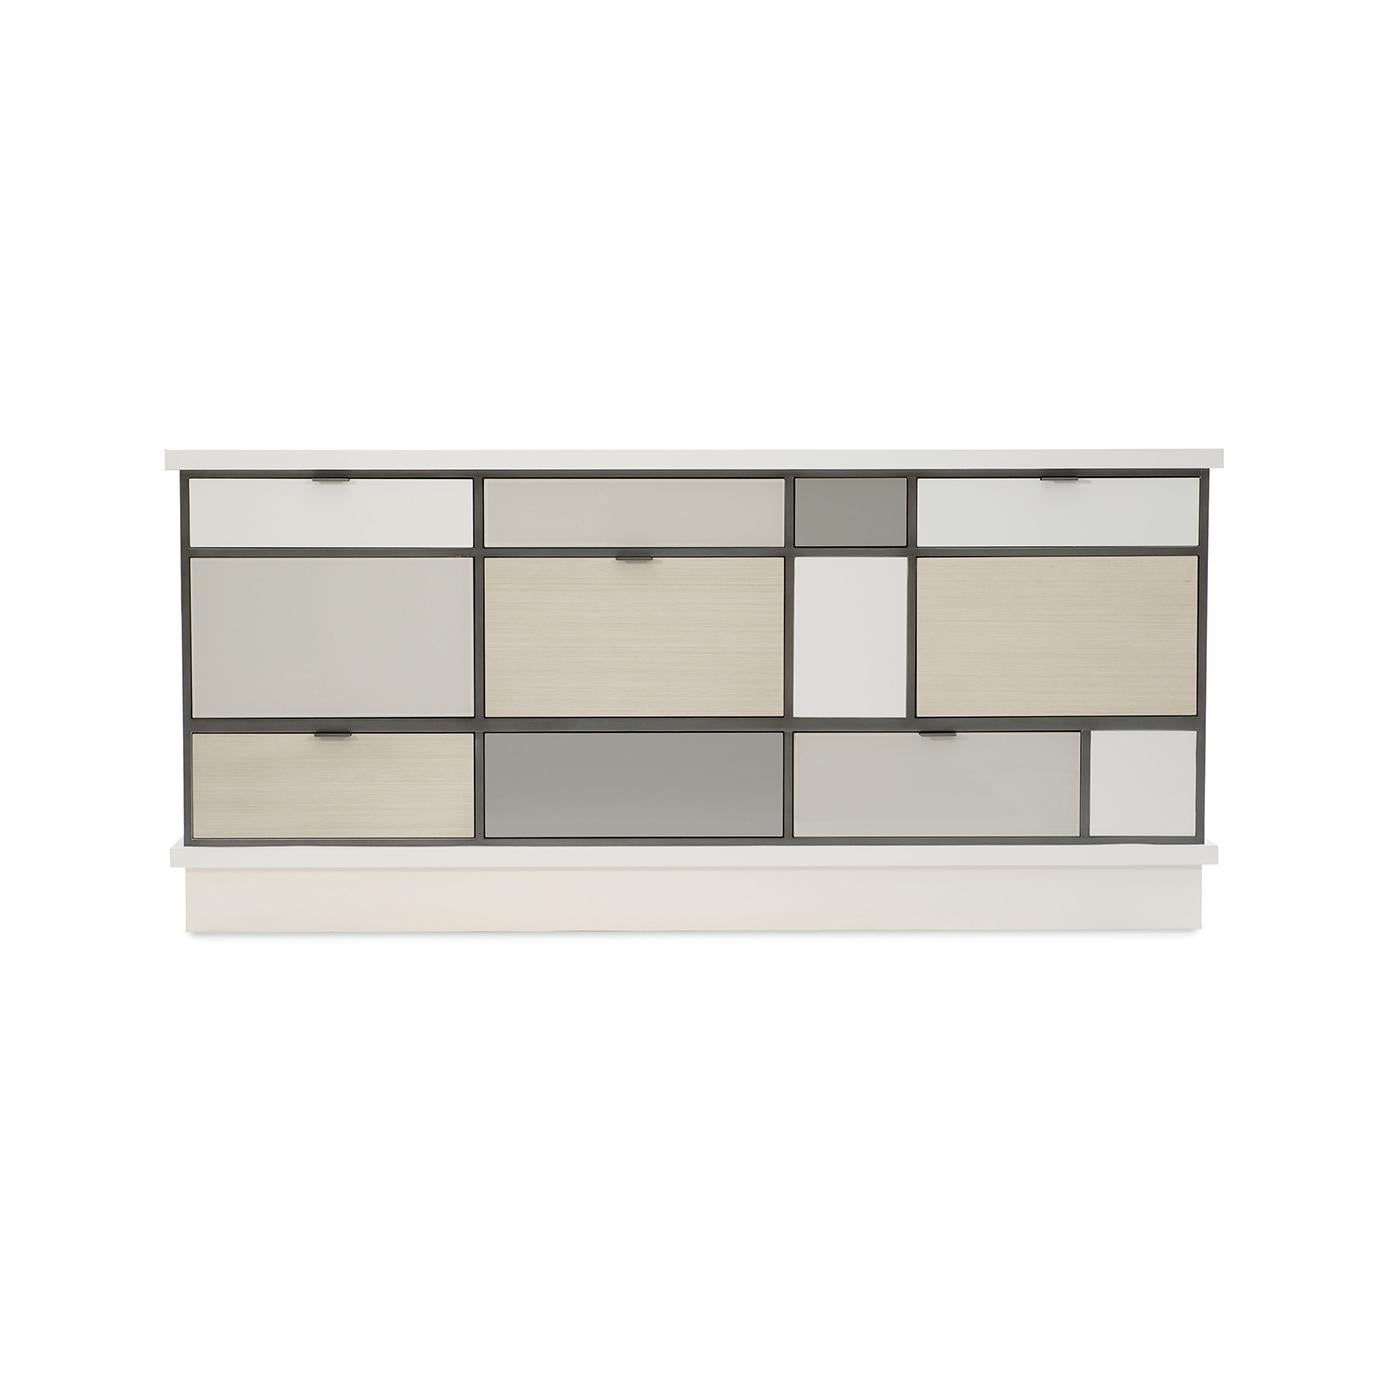 Modern Geometric Sideboard, with character worthy of designing a room around, this buffet makes any space a destination. Created with eight drawers and four doors in a checkerboard pattern, its front is a medley of harmonizing glass fronts